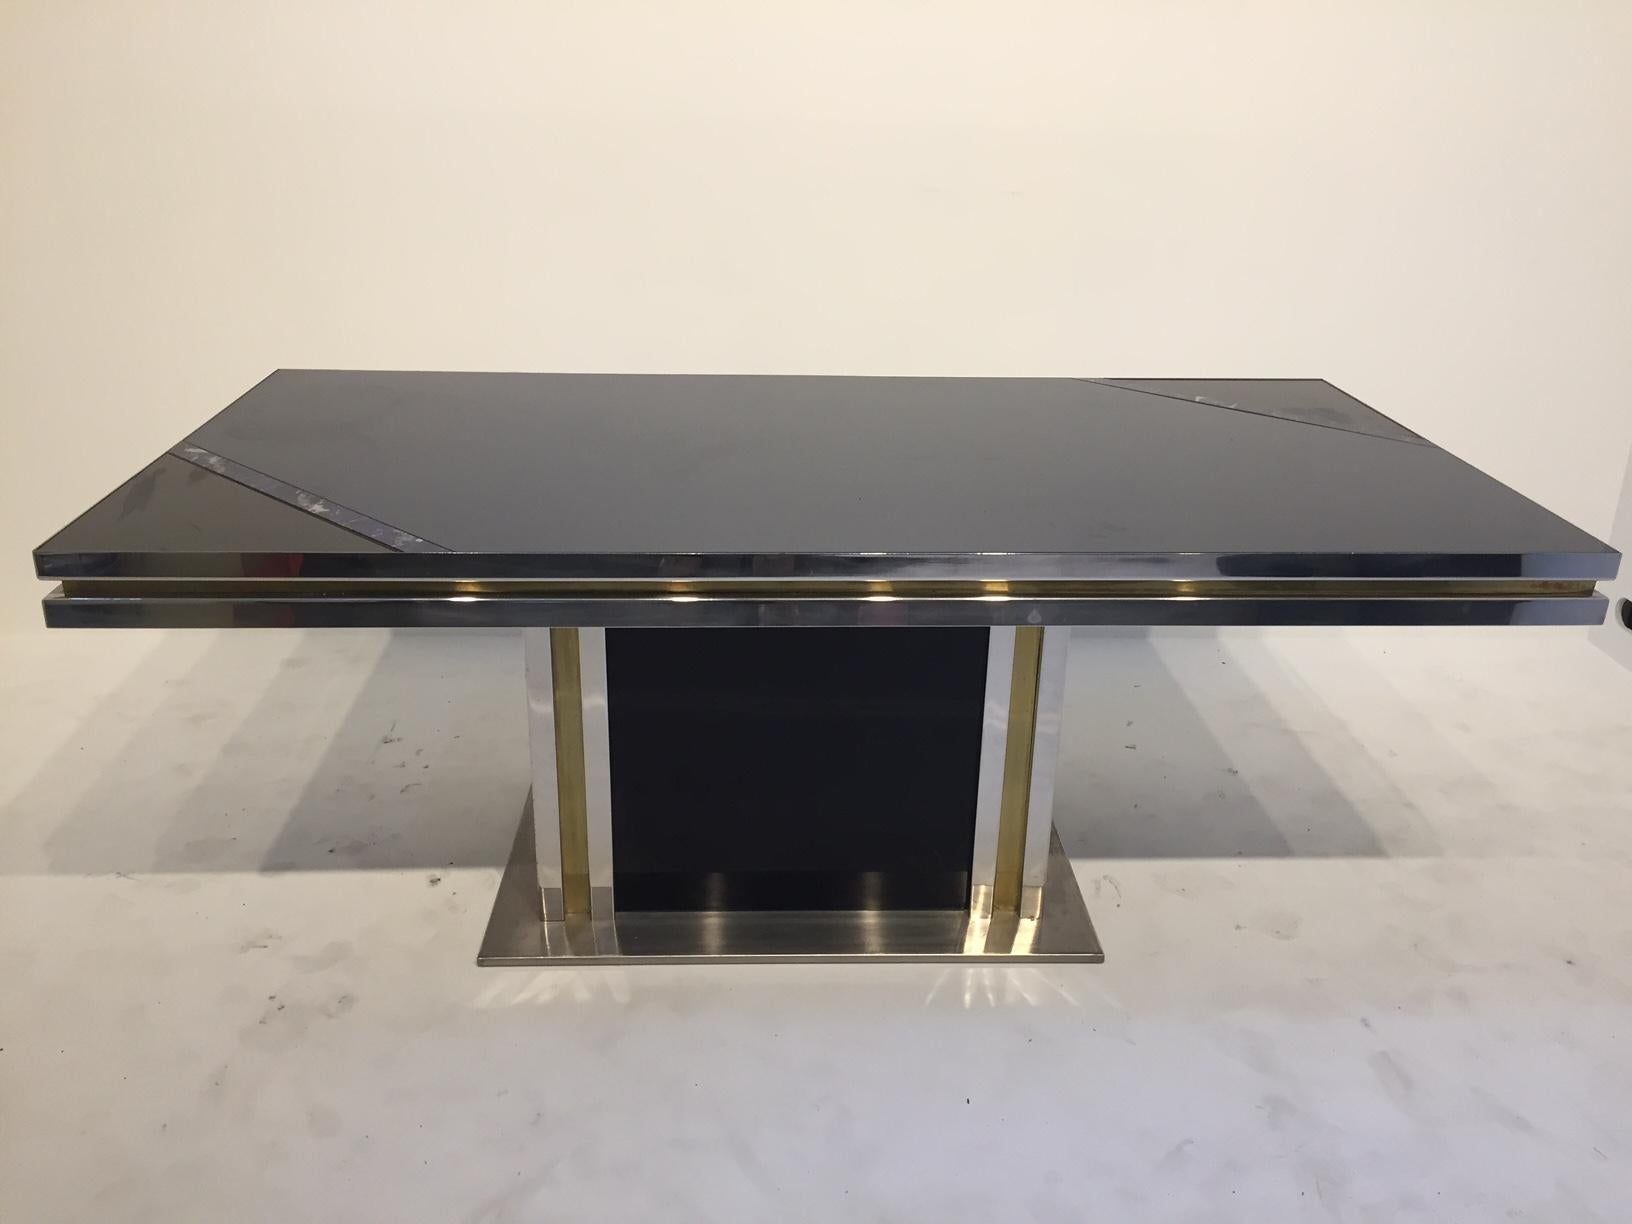 Dining table design in the 1980s.
Gold, chrome and colored glass with Lapis Lazuli inlays.